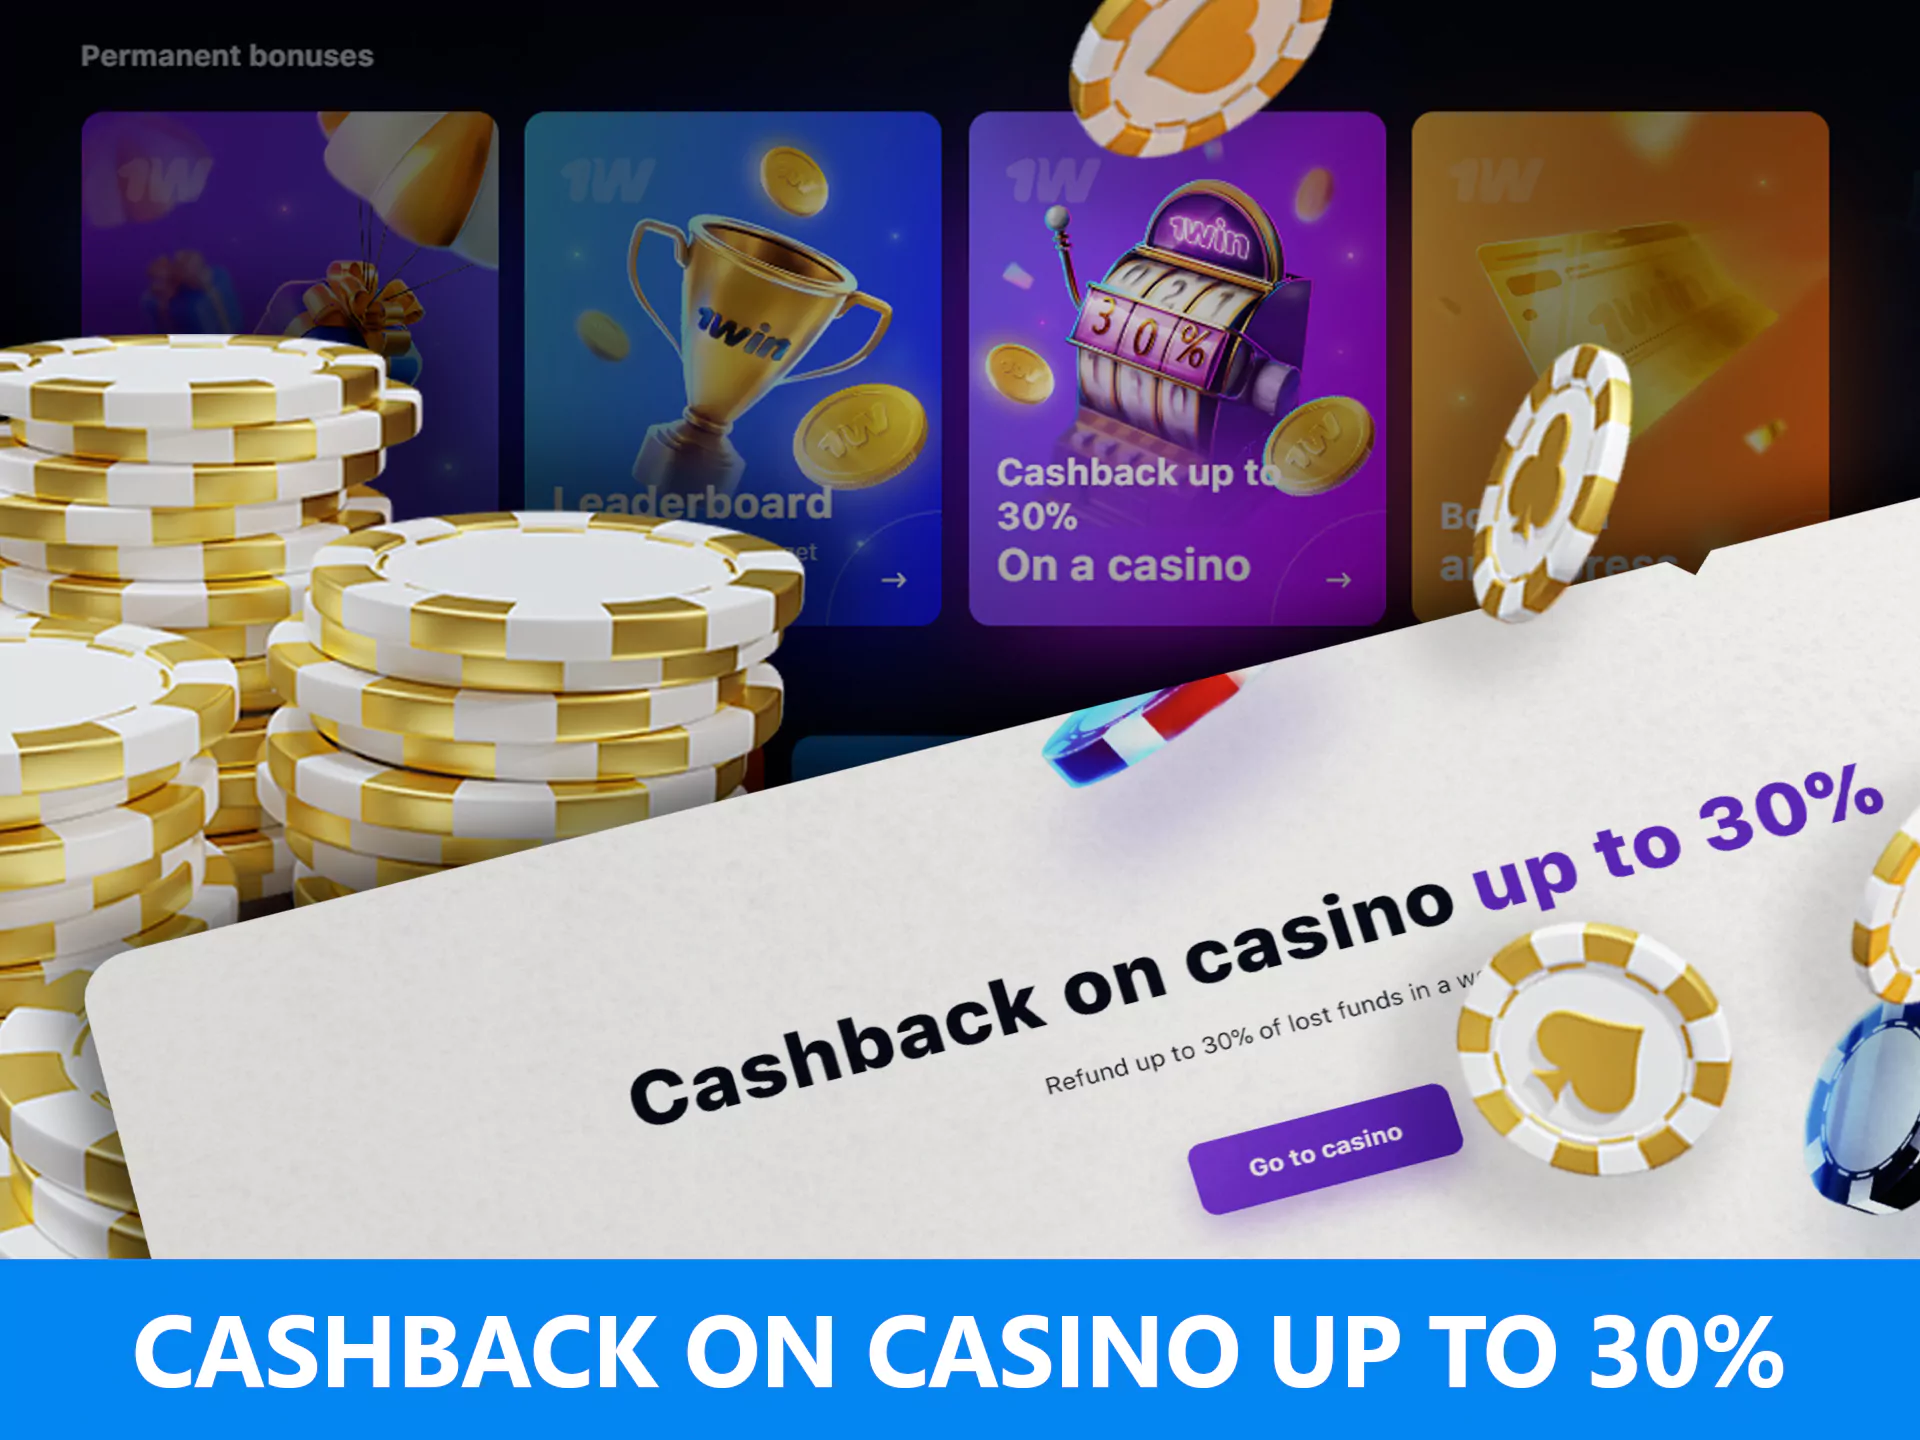 If you play casino games, you can get a cashback.